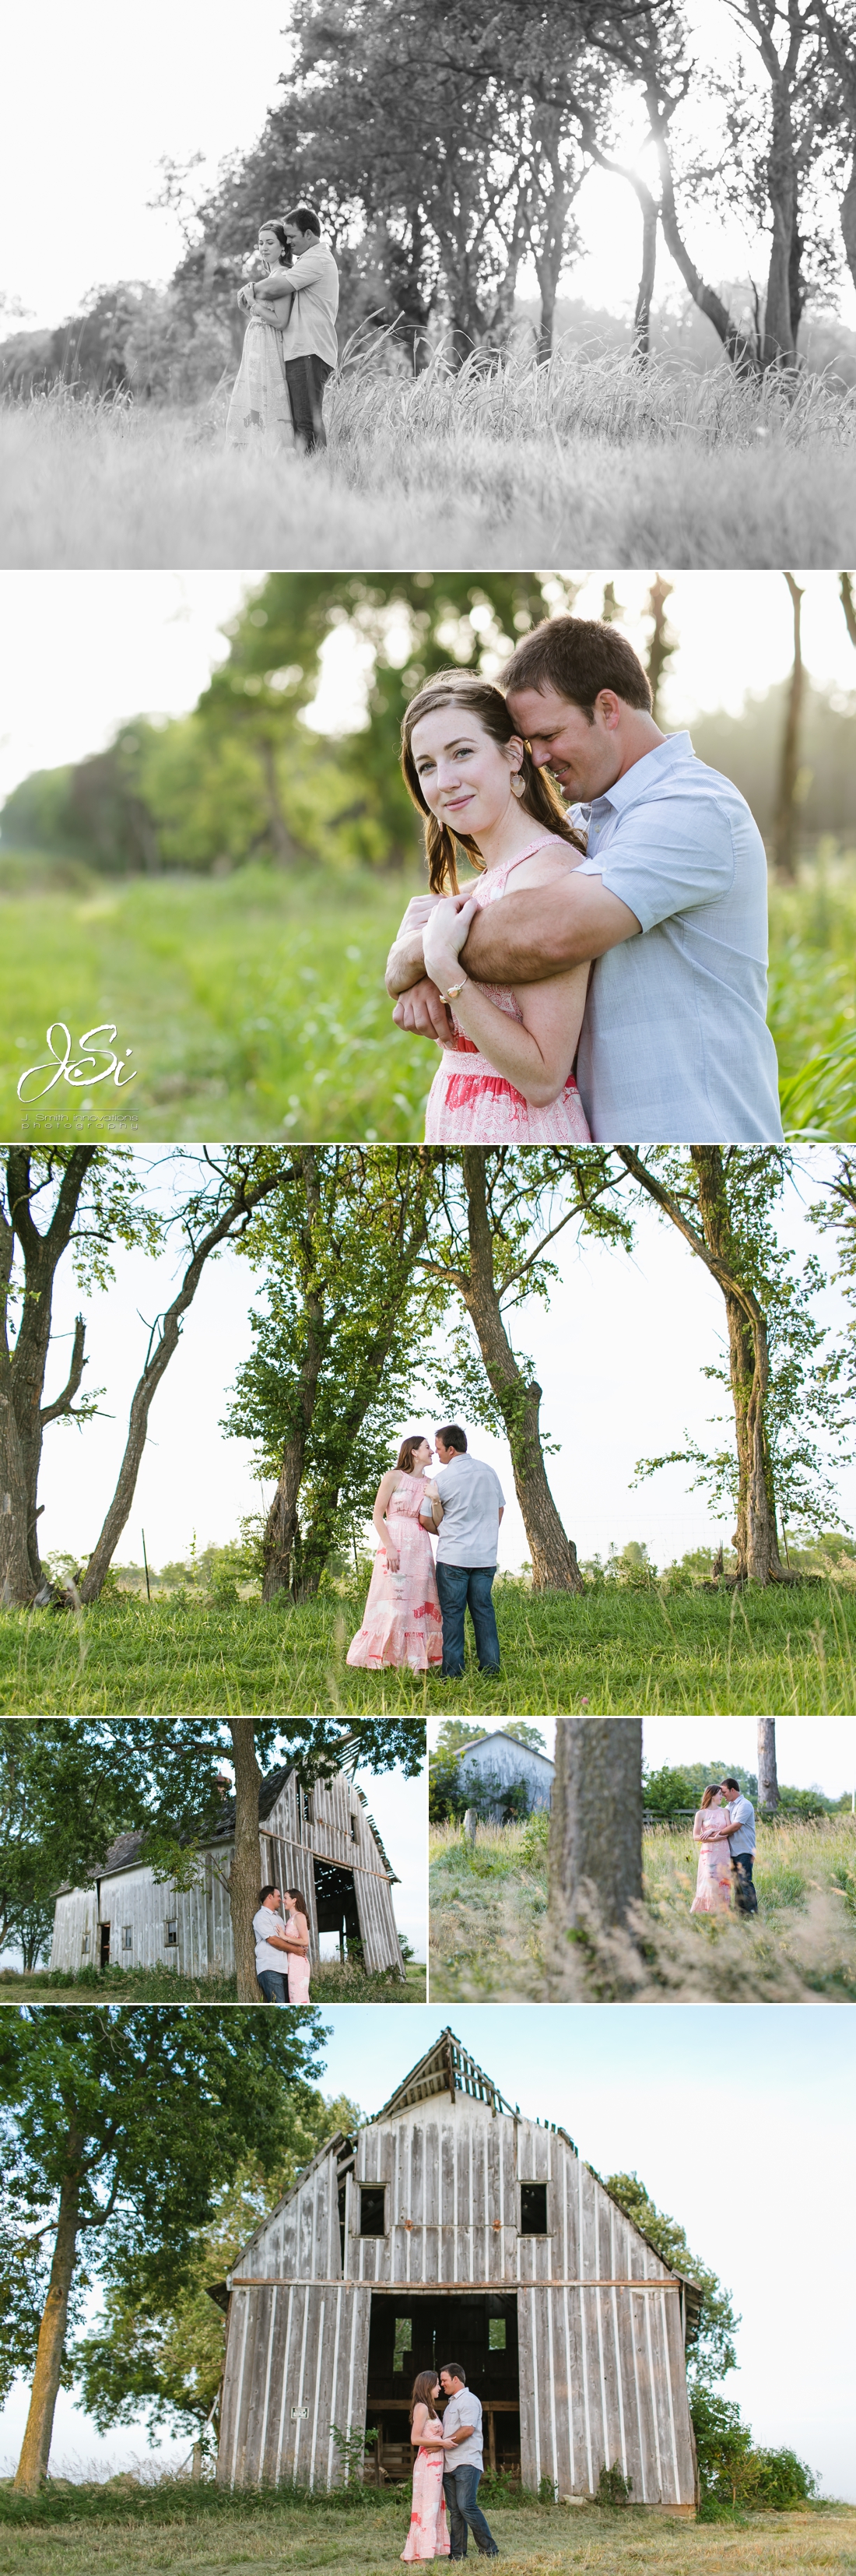 Kansas City sweet country engagement session photo